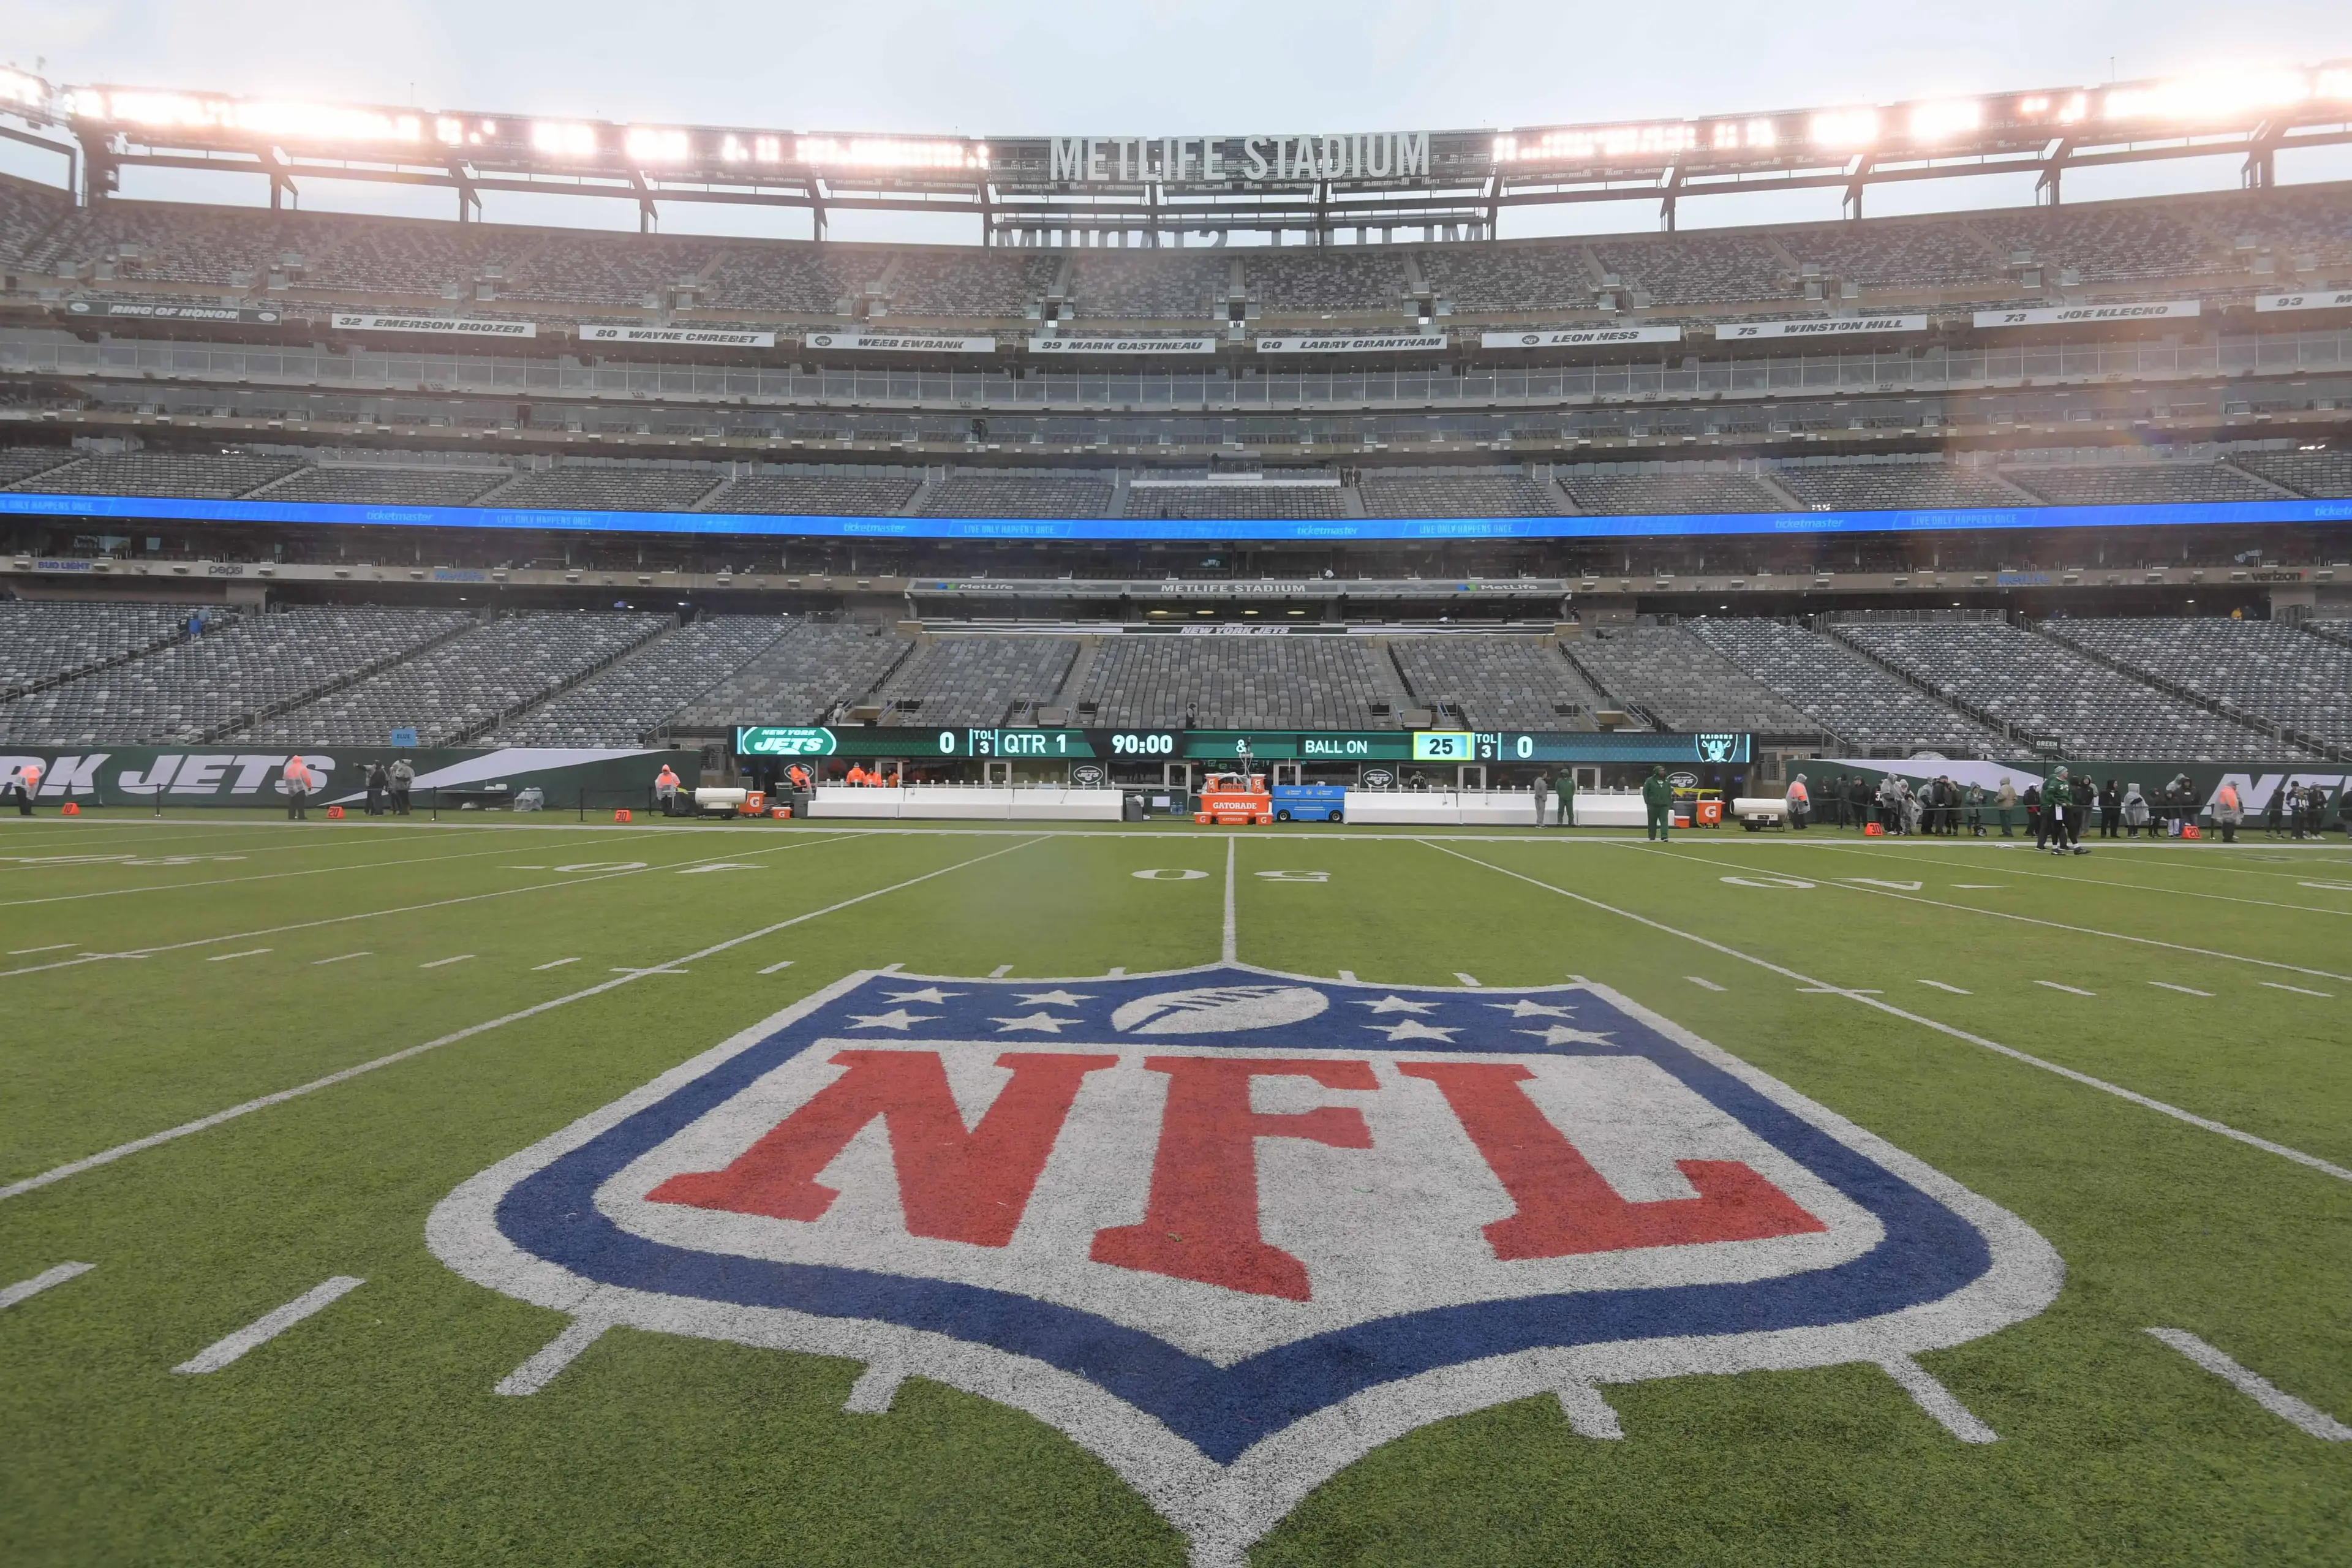 General view inside MetLife Stadium / USA TODAY Sports